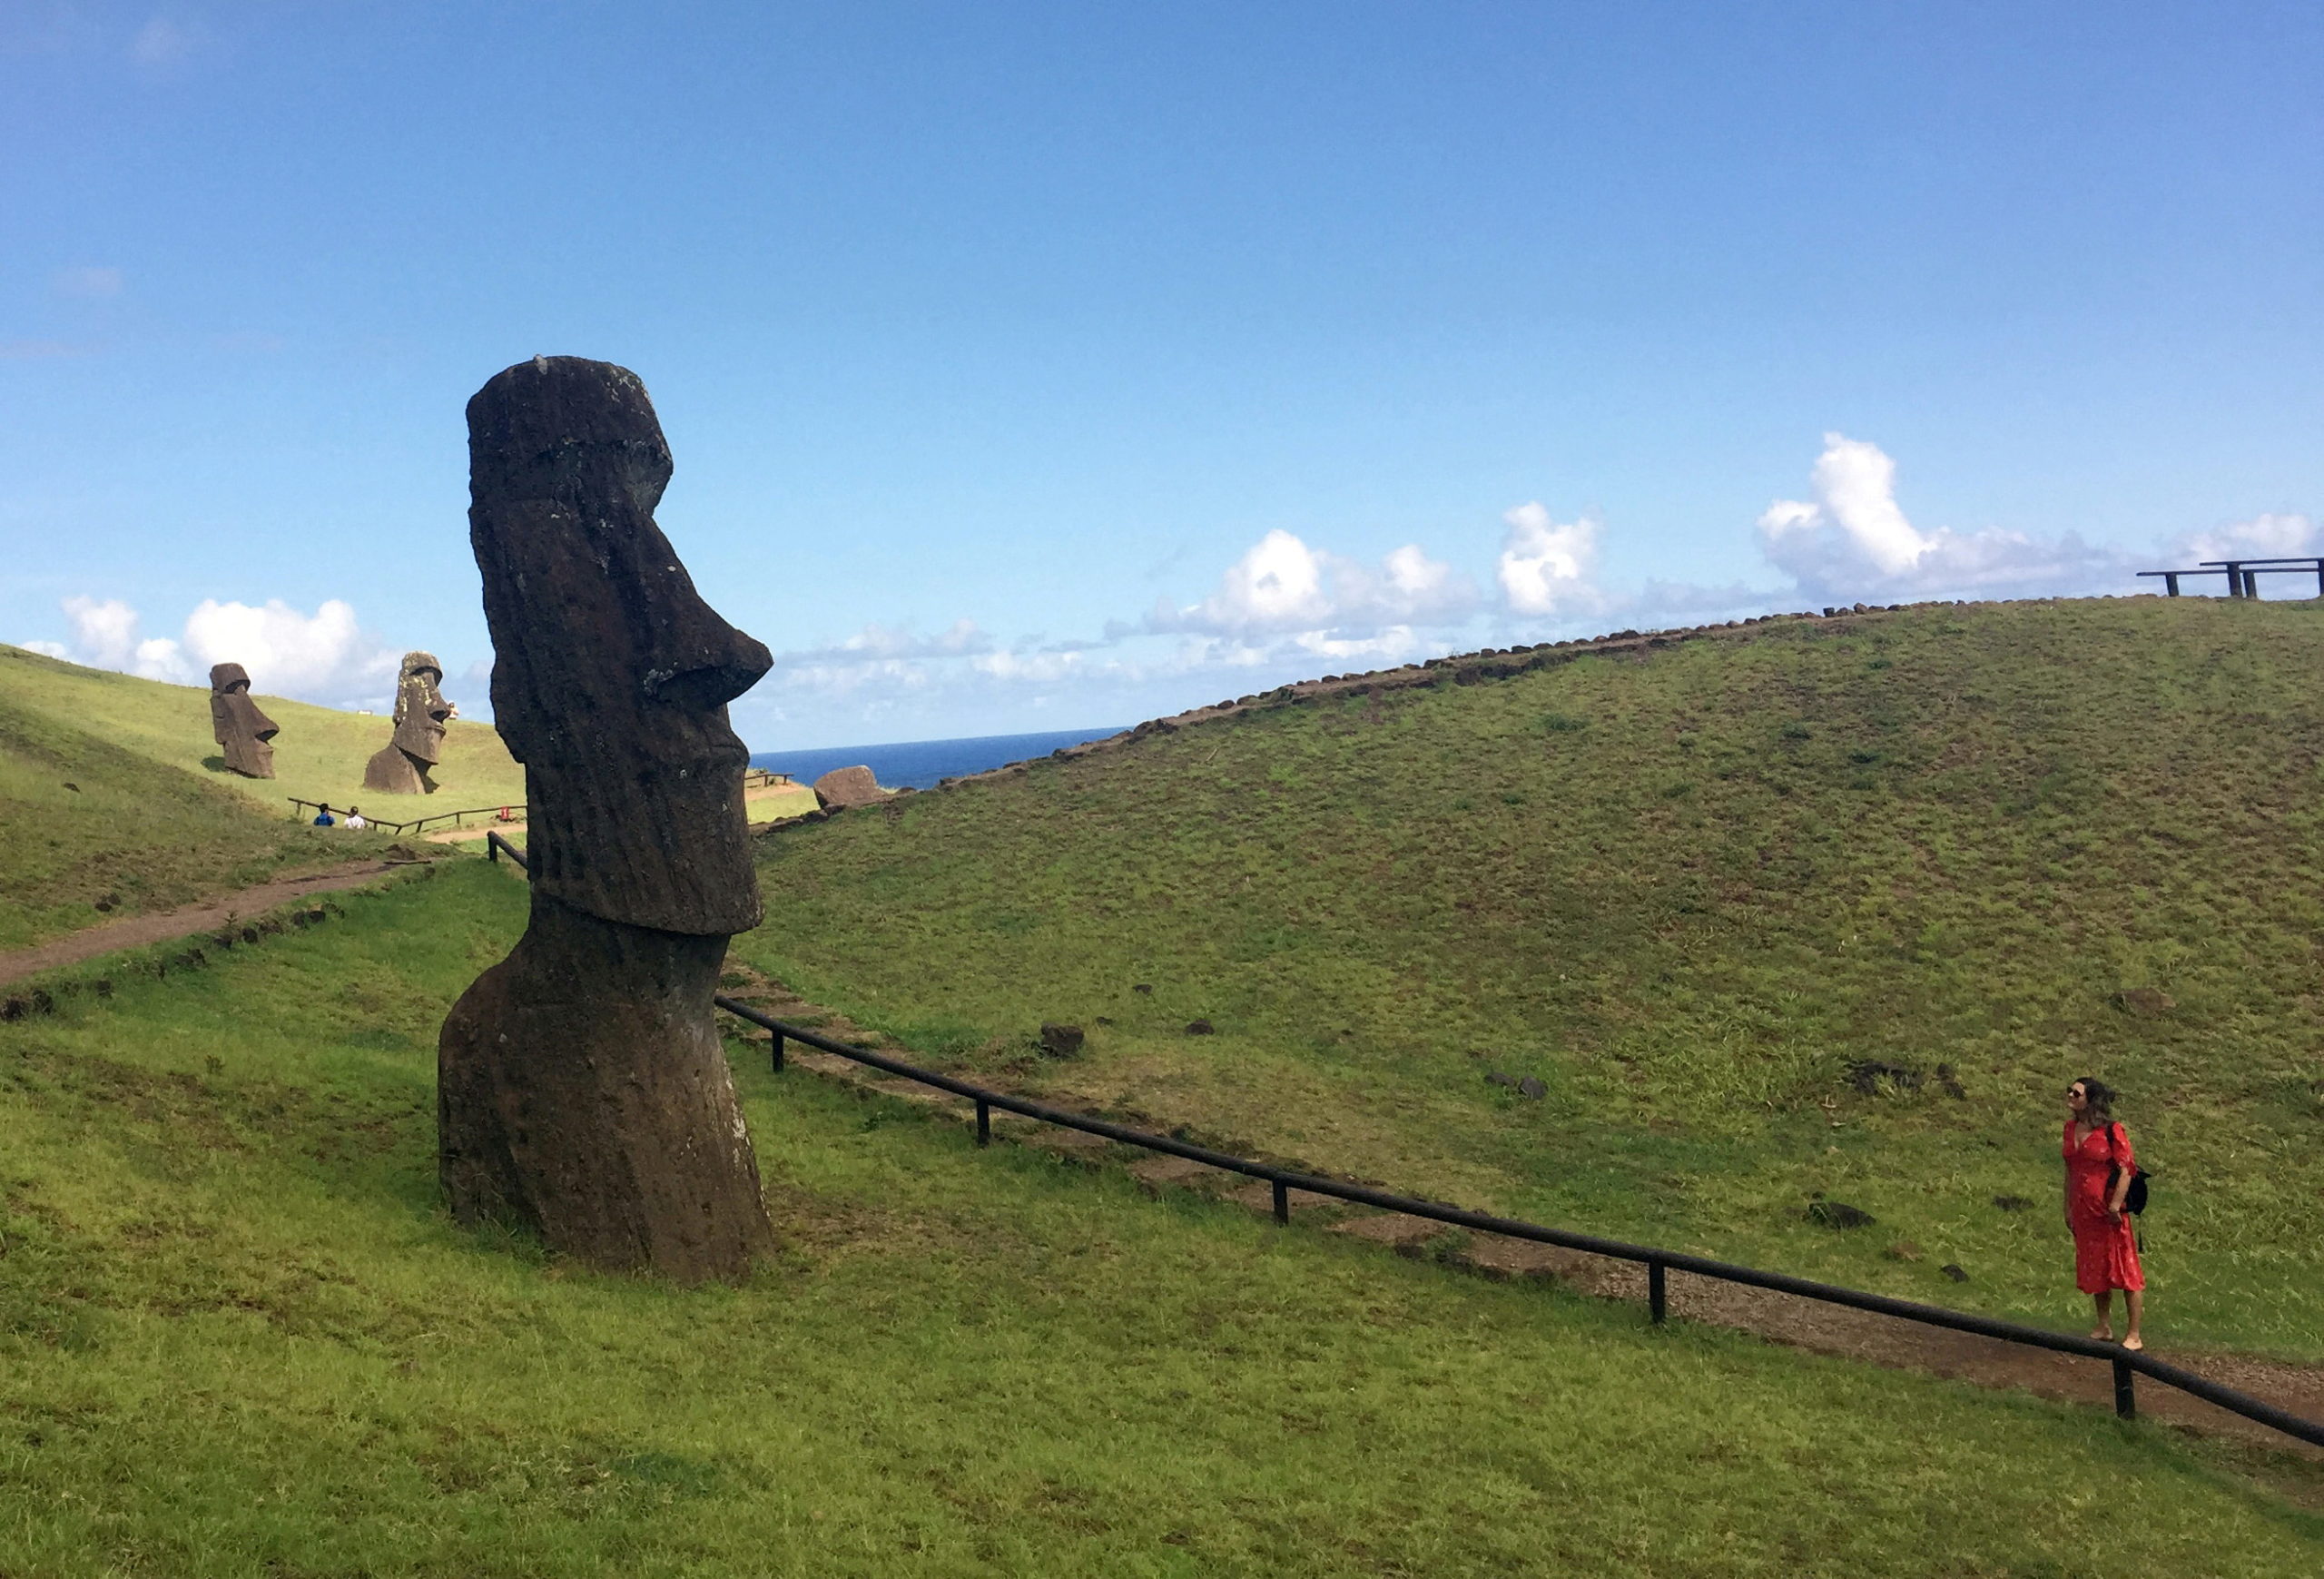 FILE PHOTO: A tourist looks at a statue named "Moai" at Easter Island, Chile February 13, 2019. Picture taken February 13, 2019. REUTERS/Marion Giraldo/File Photo